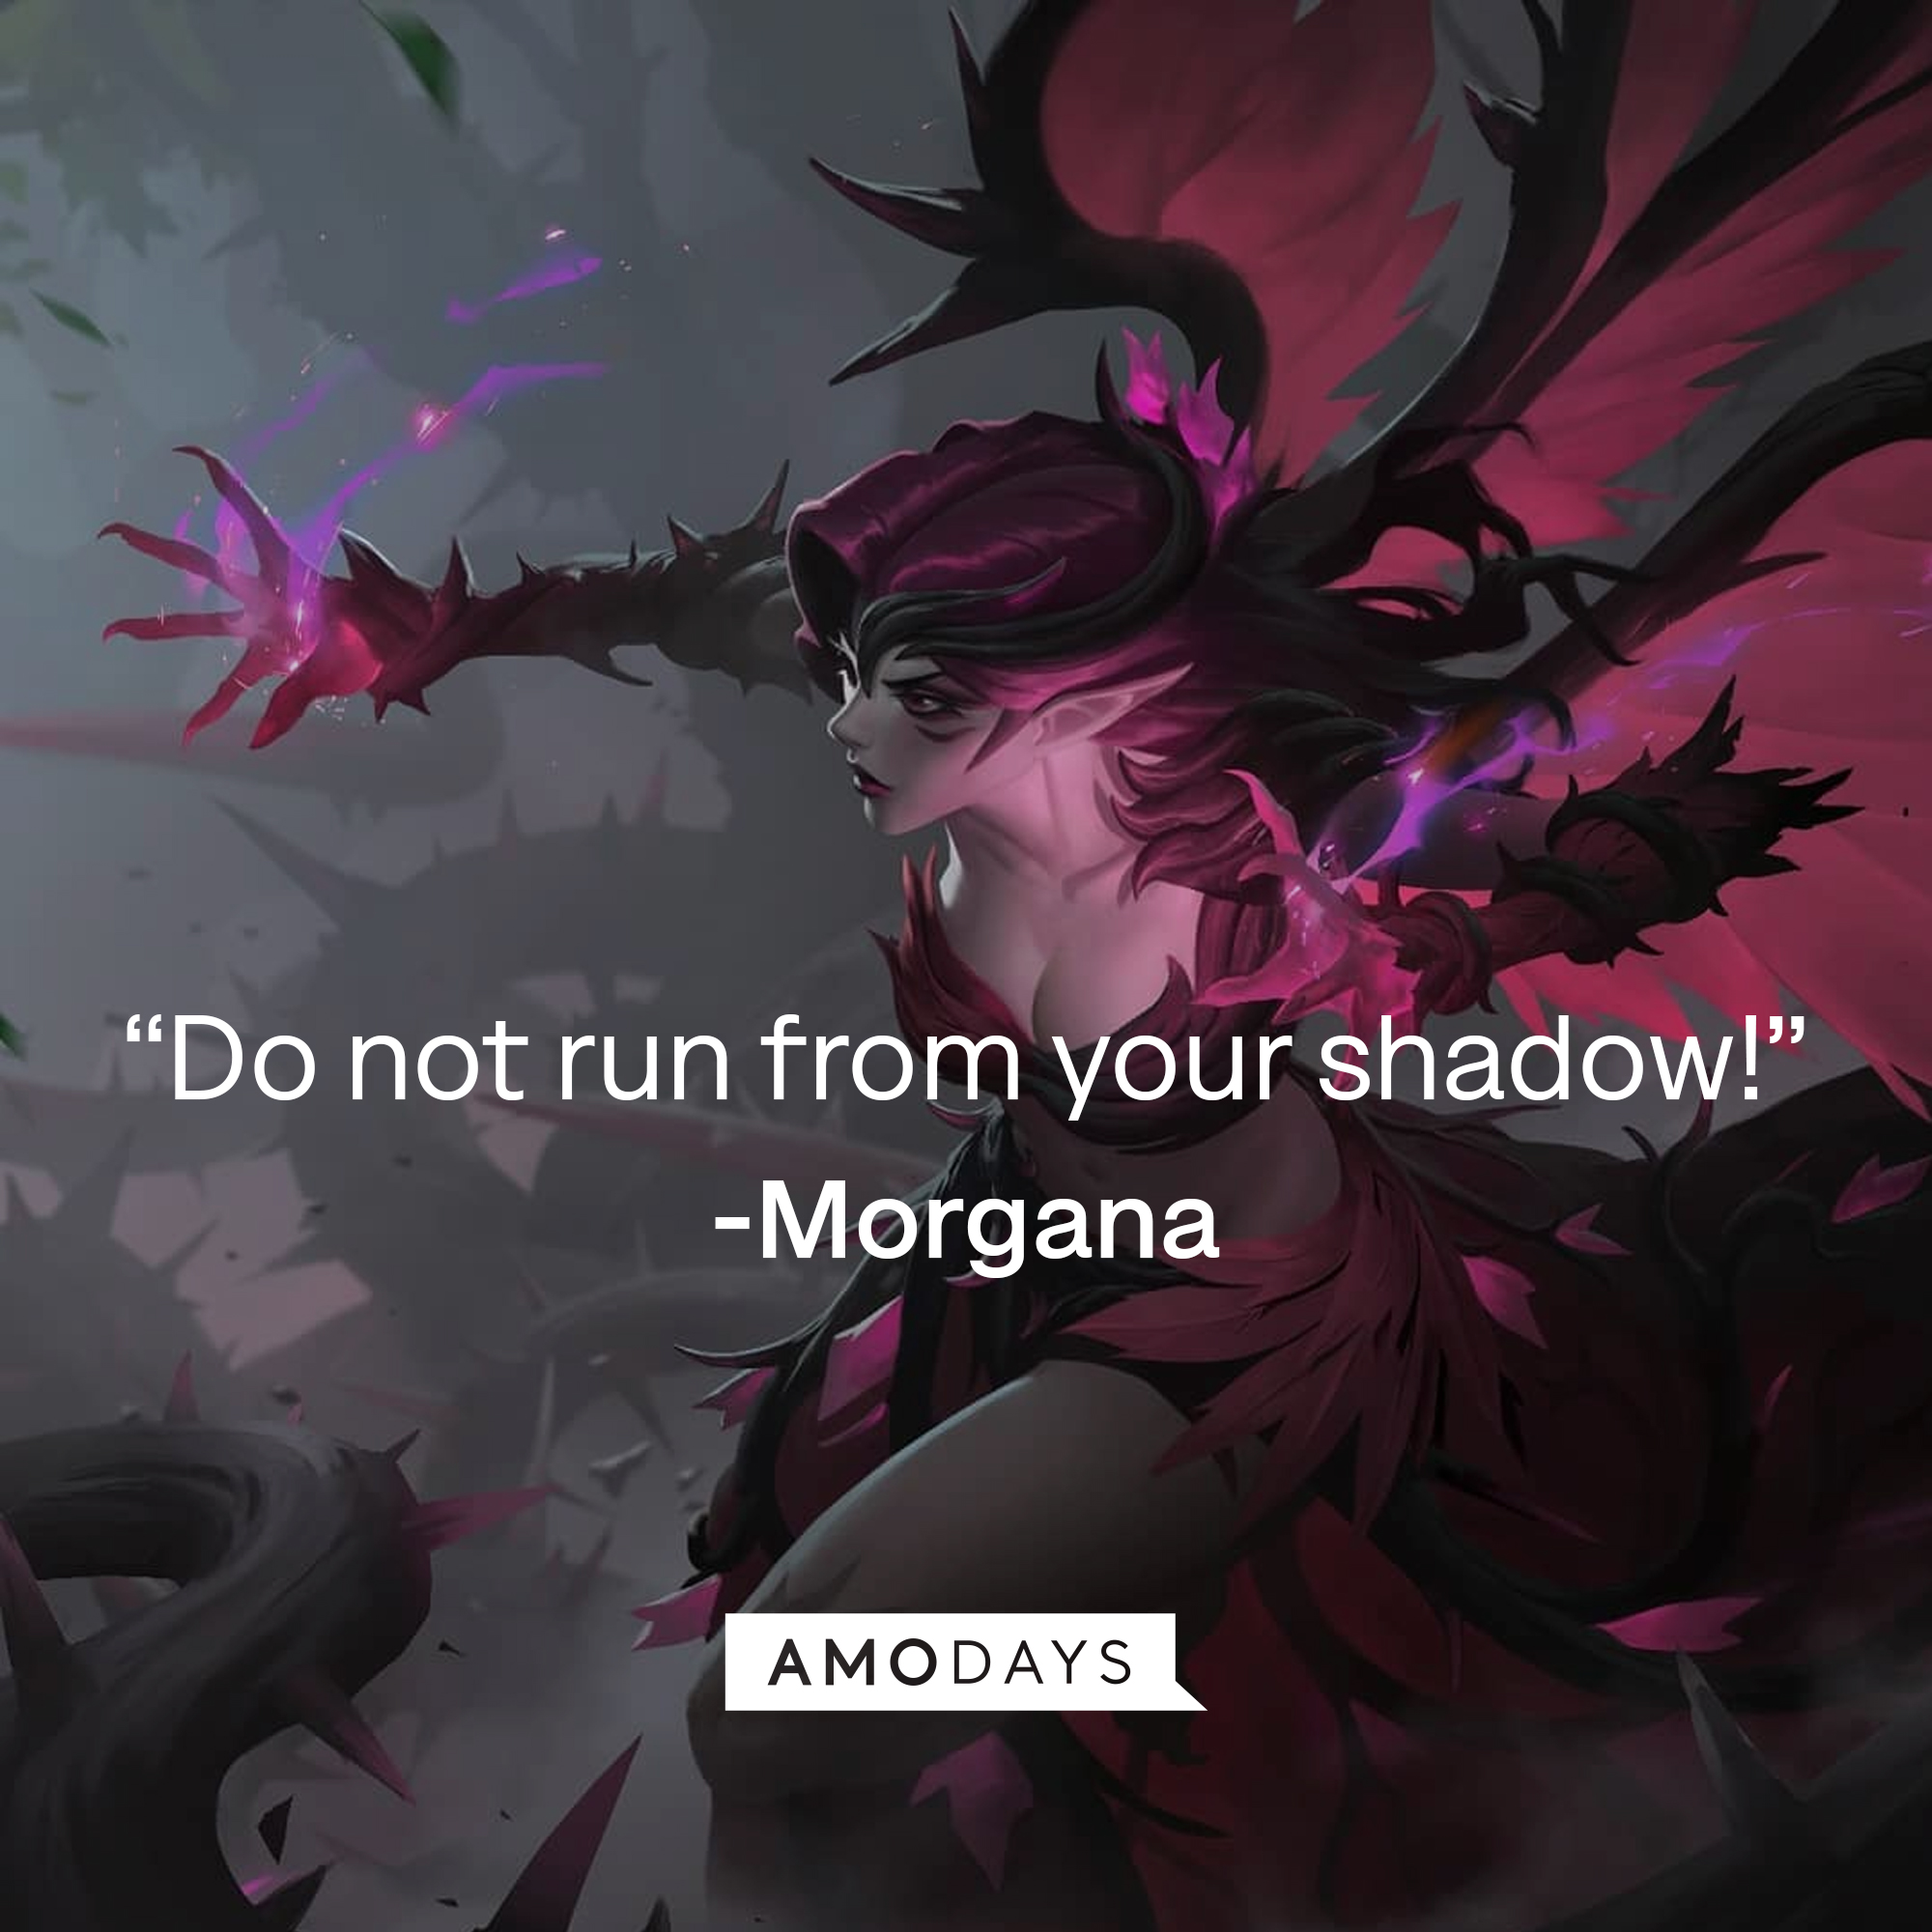 An image of Morgana, with her quote: “Do not run from your shadow!” | Source: Facebook.com/leagueoflegends